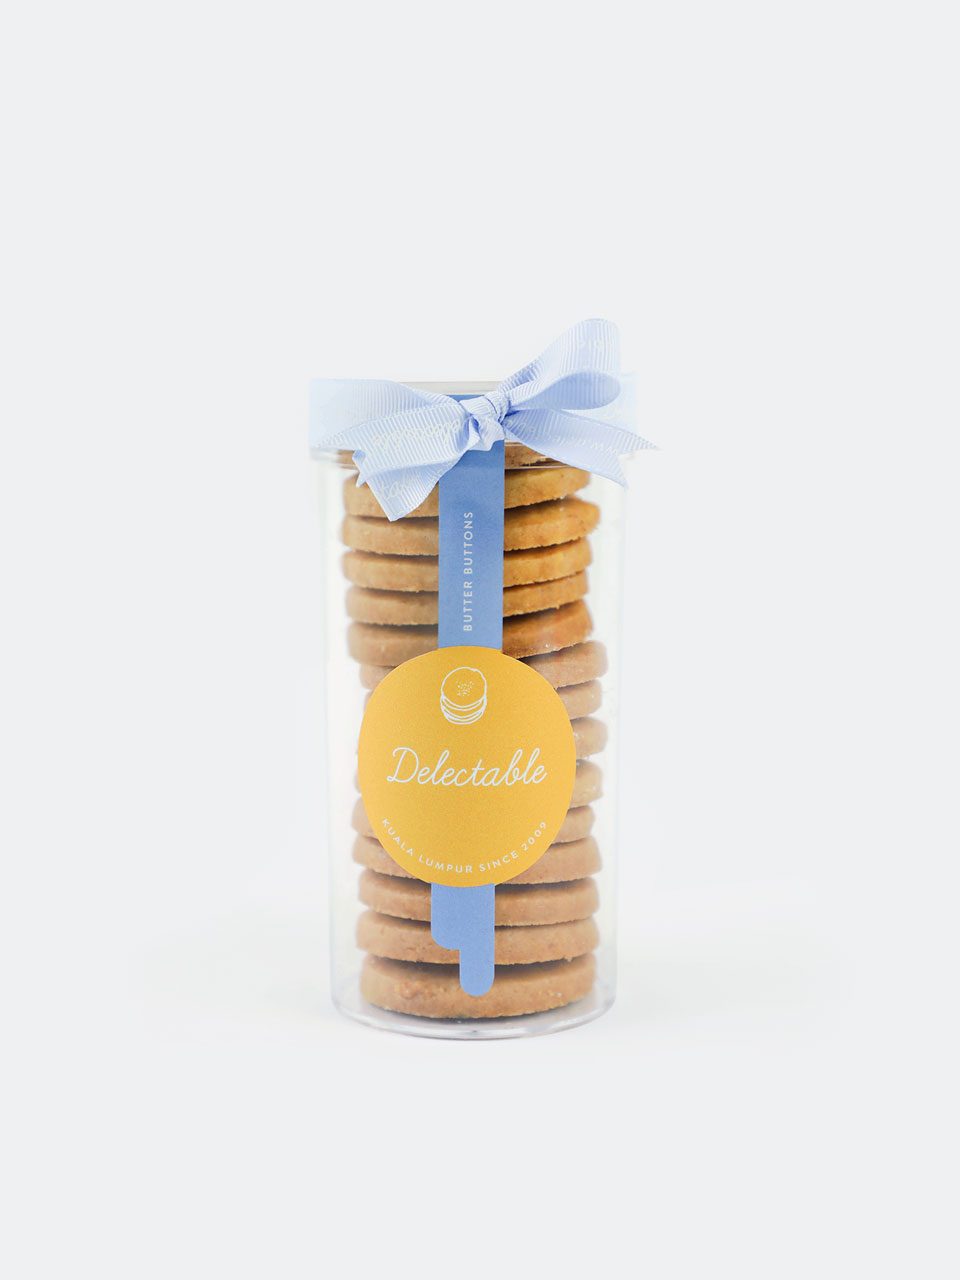 Delectable Cookies - Cookies delivery Malaysia